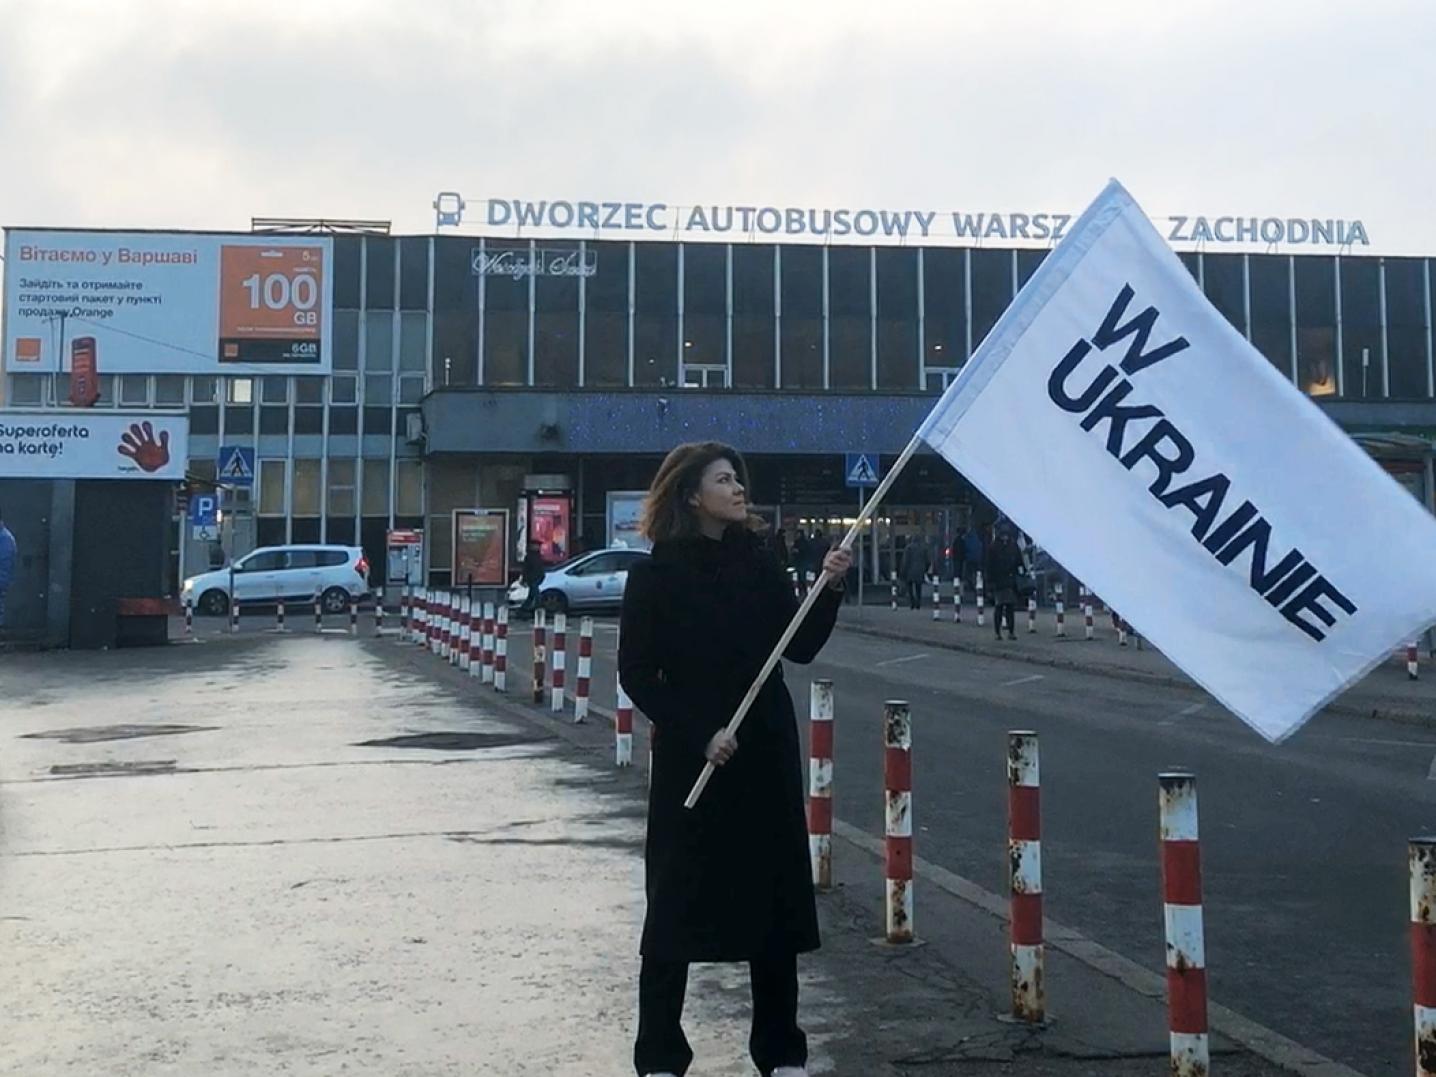 Action “In Ukrainie”, at the Western Railway Station in Warsaw (bus station, which is the first stop for Ukrainian travelers coming to Warsaw), 2019. 